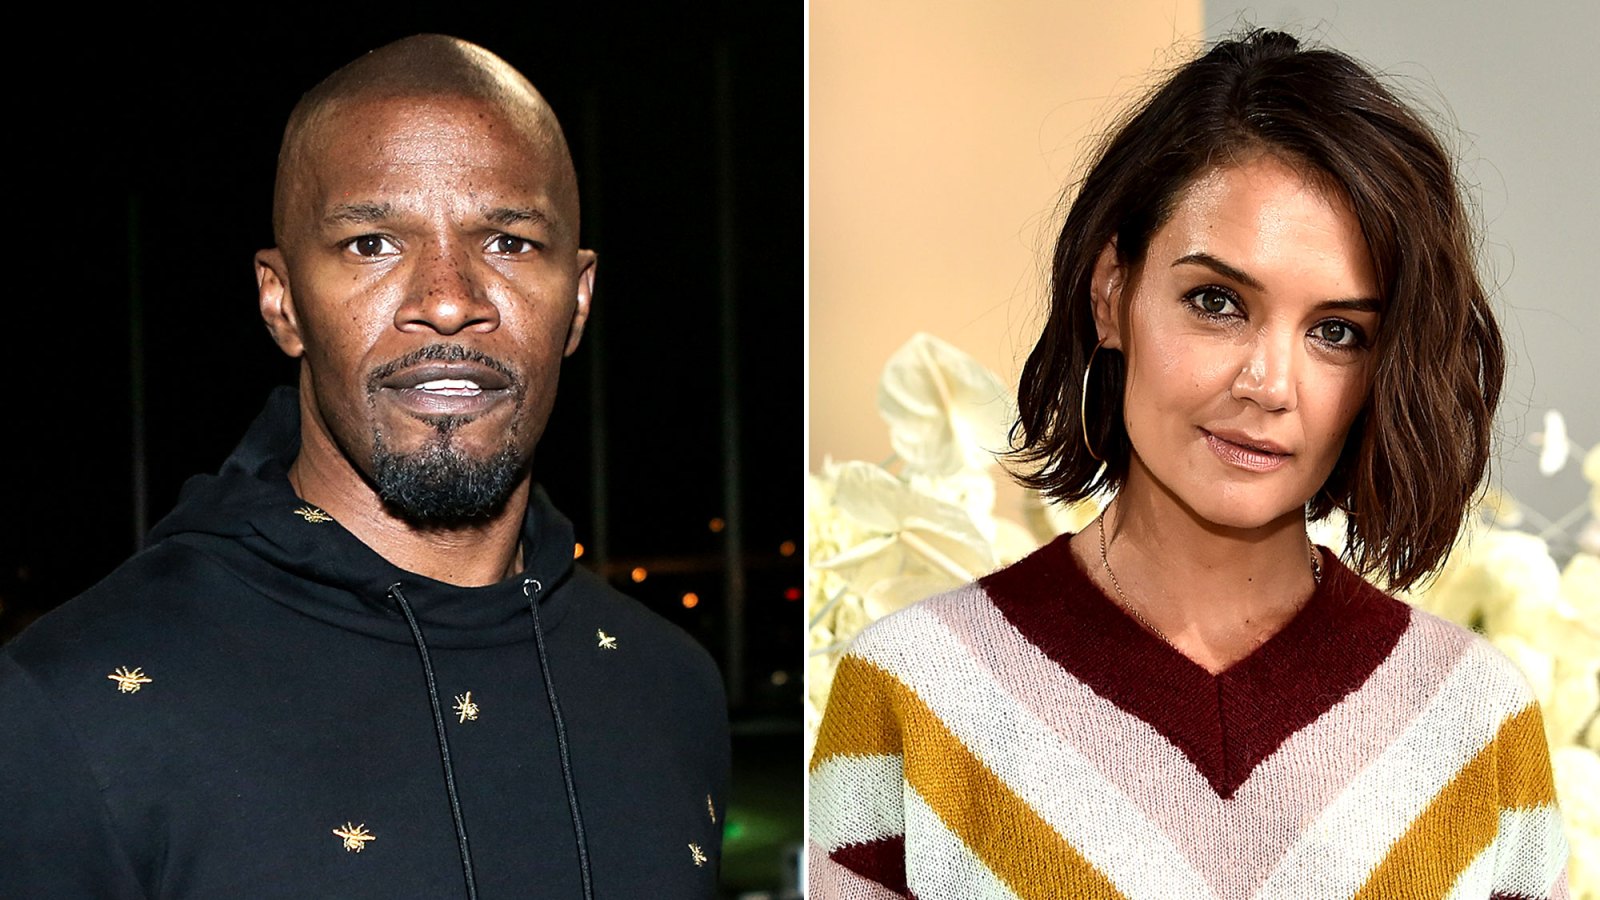 Jamie Foxx and Katie Holmes Keep Close on Chilly NYC Walk Amid Split Speculation